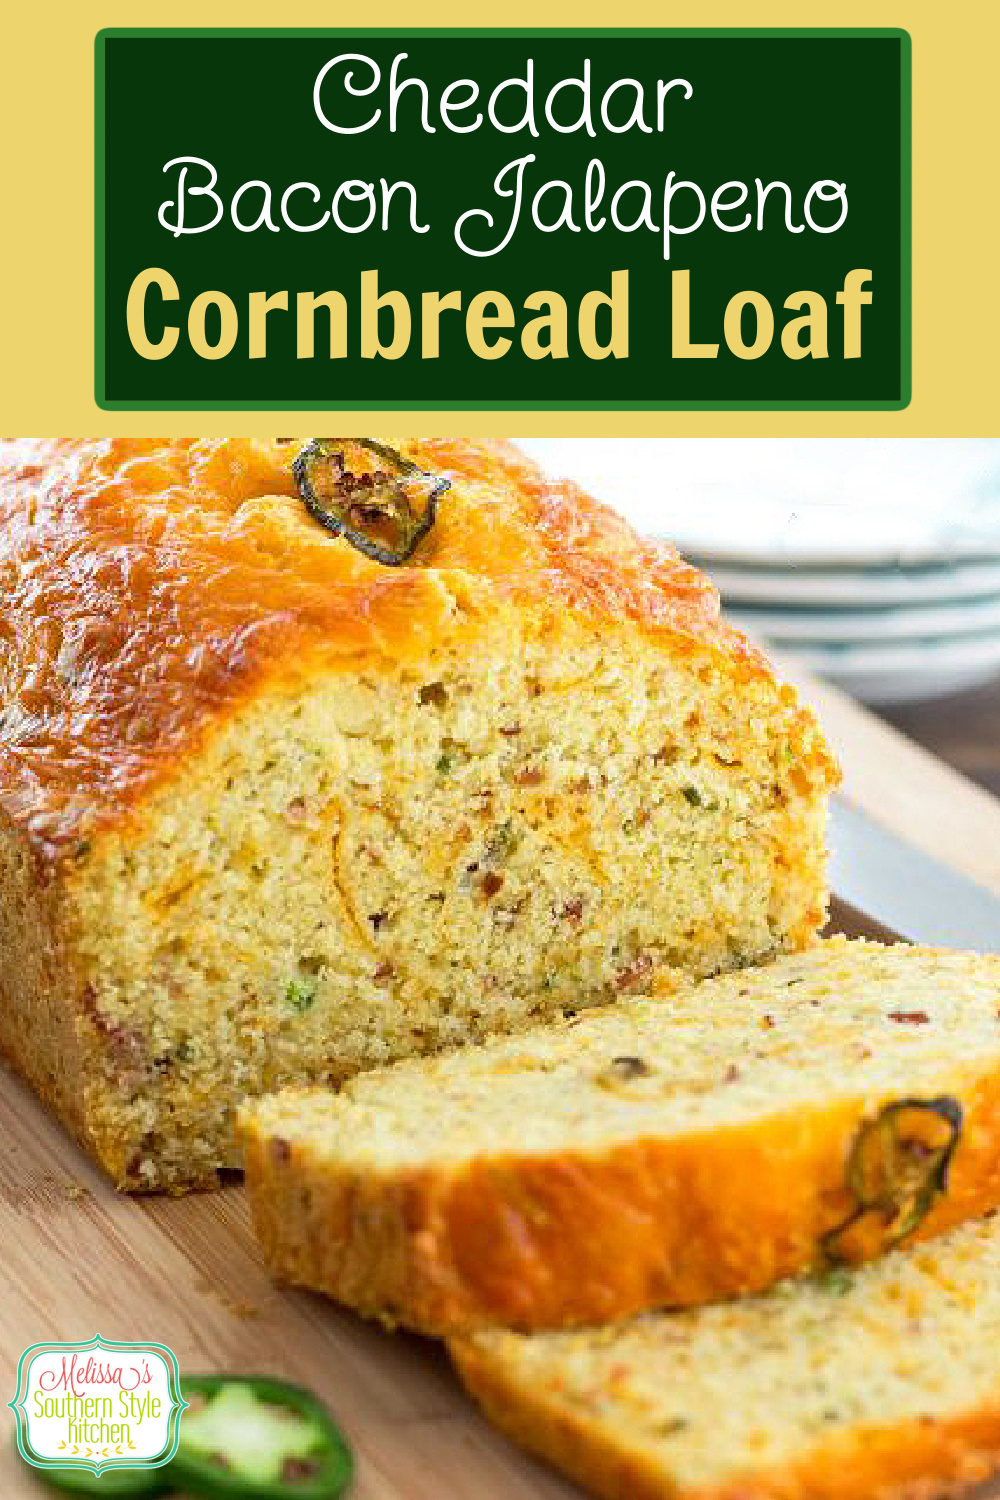 This amazing Cheddar Bacon Jalapeno Cornbread Loaf is sure to become a family favorite #cornbread #cornbreadrecipes #baconcornbread #jalapenocornbread #breadrecipes #southerncornbread #bread #southernfood #southernrecipes